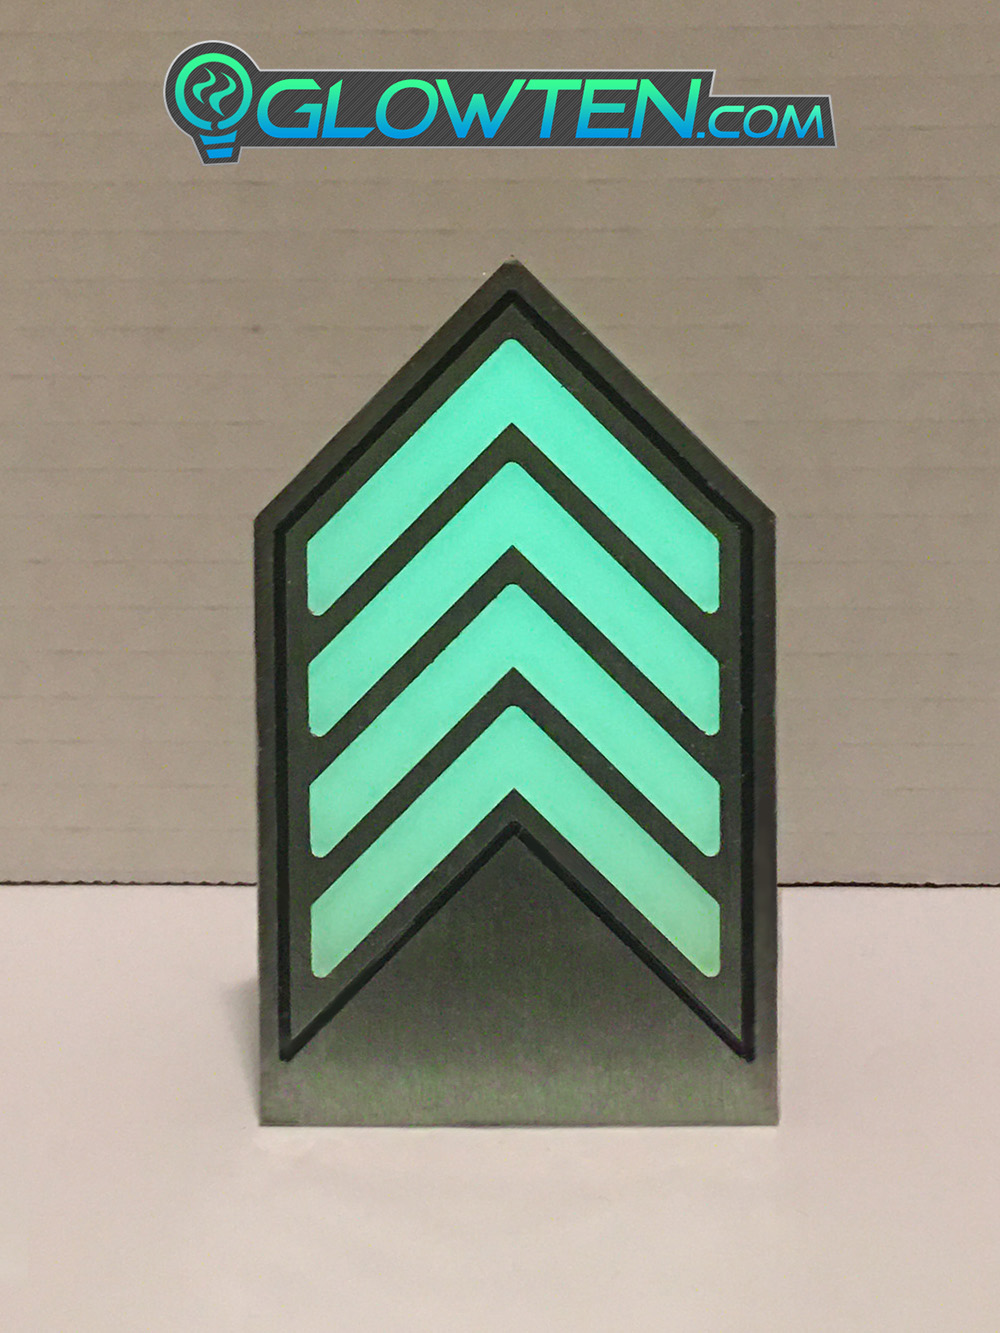 GLOWTEN.com - Glow in the Dark Ground FOUR ARROWS Directional Emergency Guide Sign Army Badge Stainless Steel Plate Easy-to-recognize symbols immediately convey important information to building occupants and fire fighters picture photo cap preview pic 6